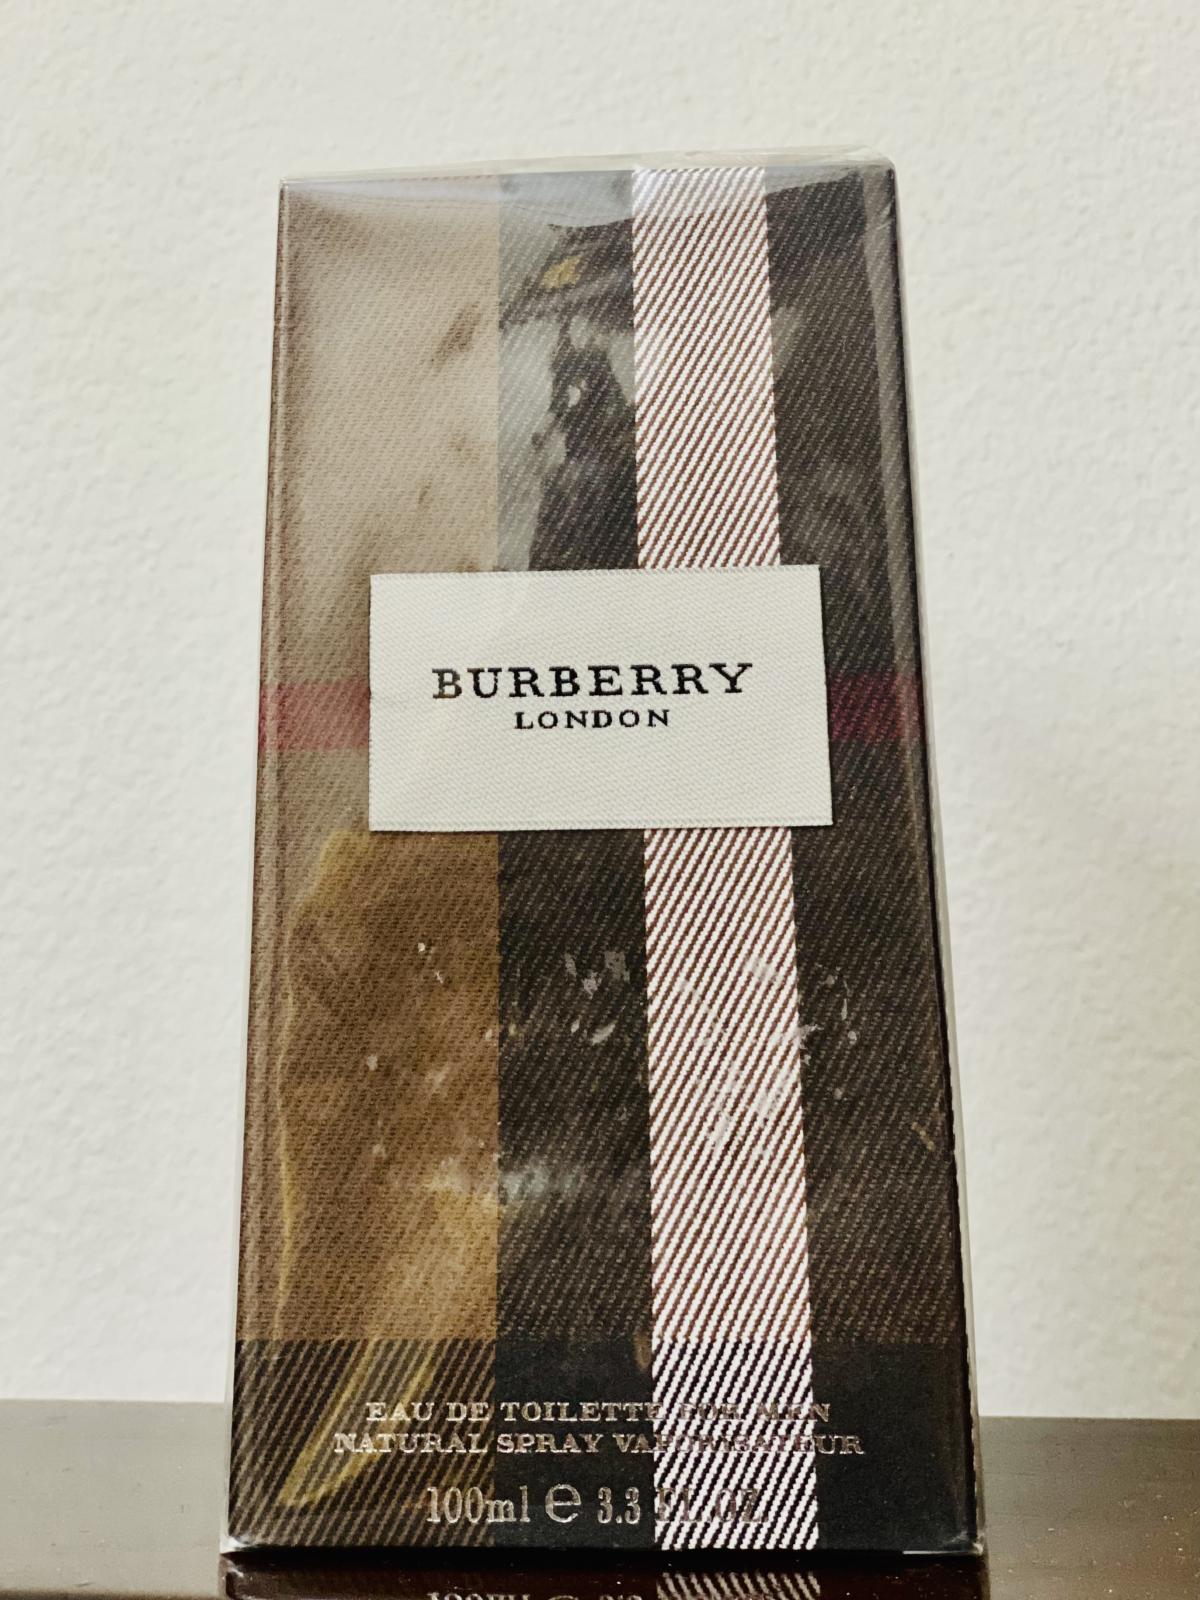 Burberry London Special Edition for Men Burberry cologne - a fragrance ...